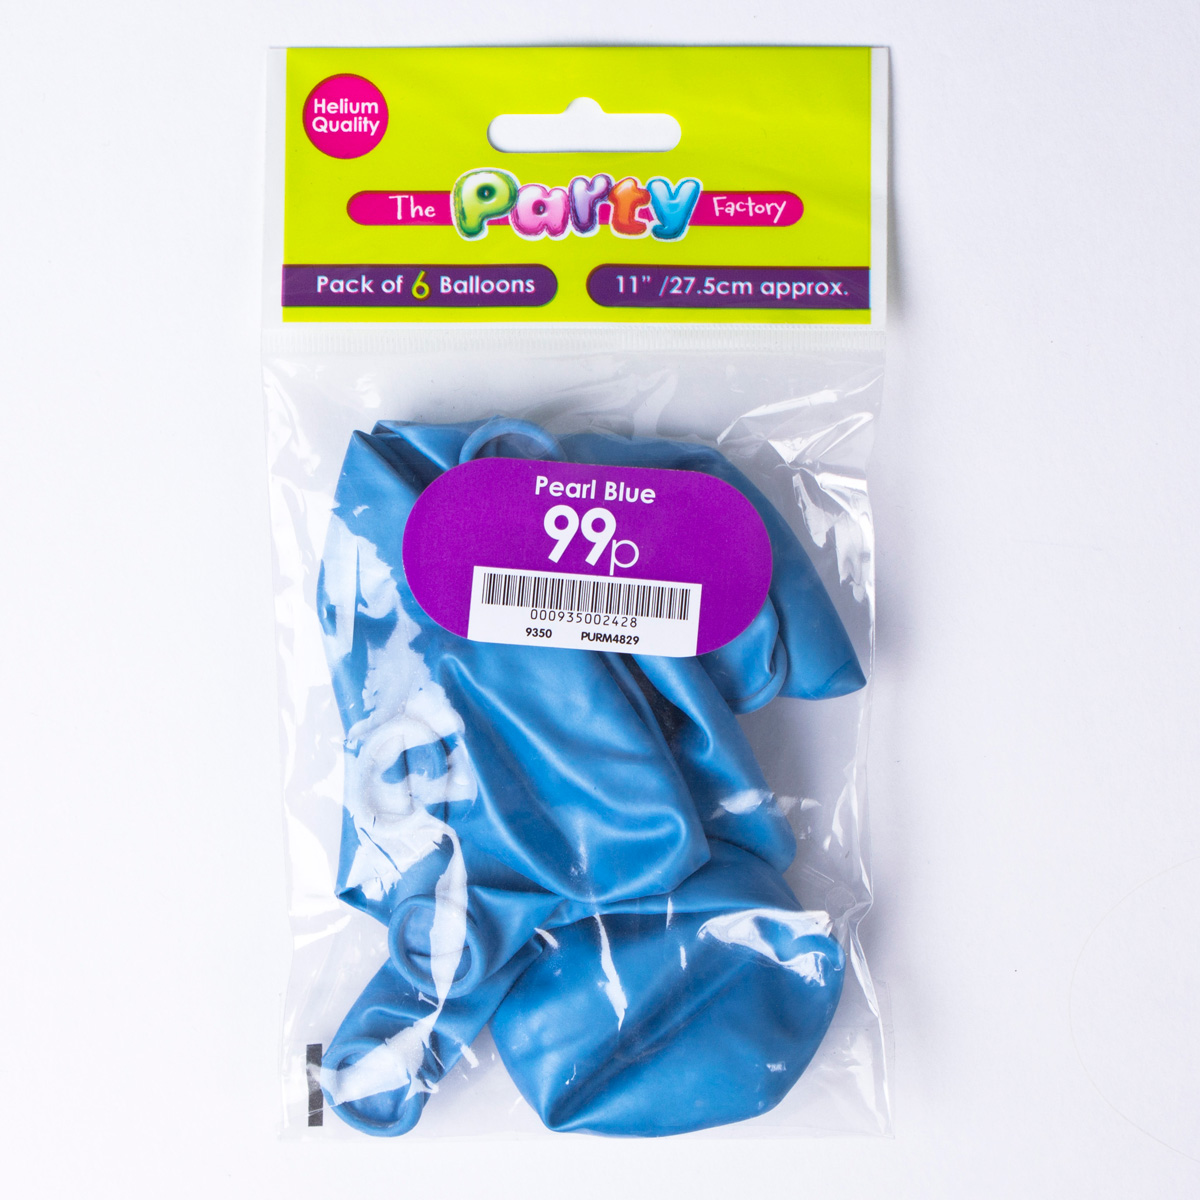 Metallic Pale Blue Air-fill Latex Balloons - Pack Of 6